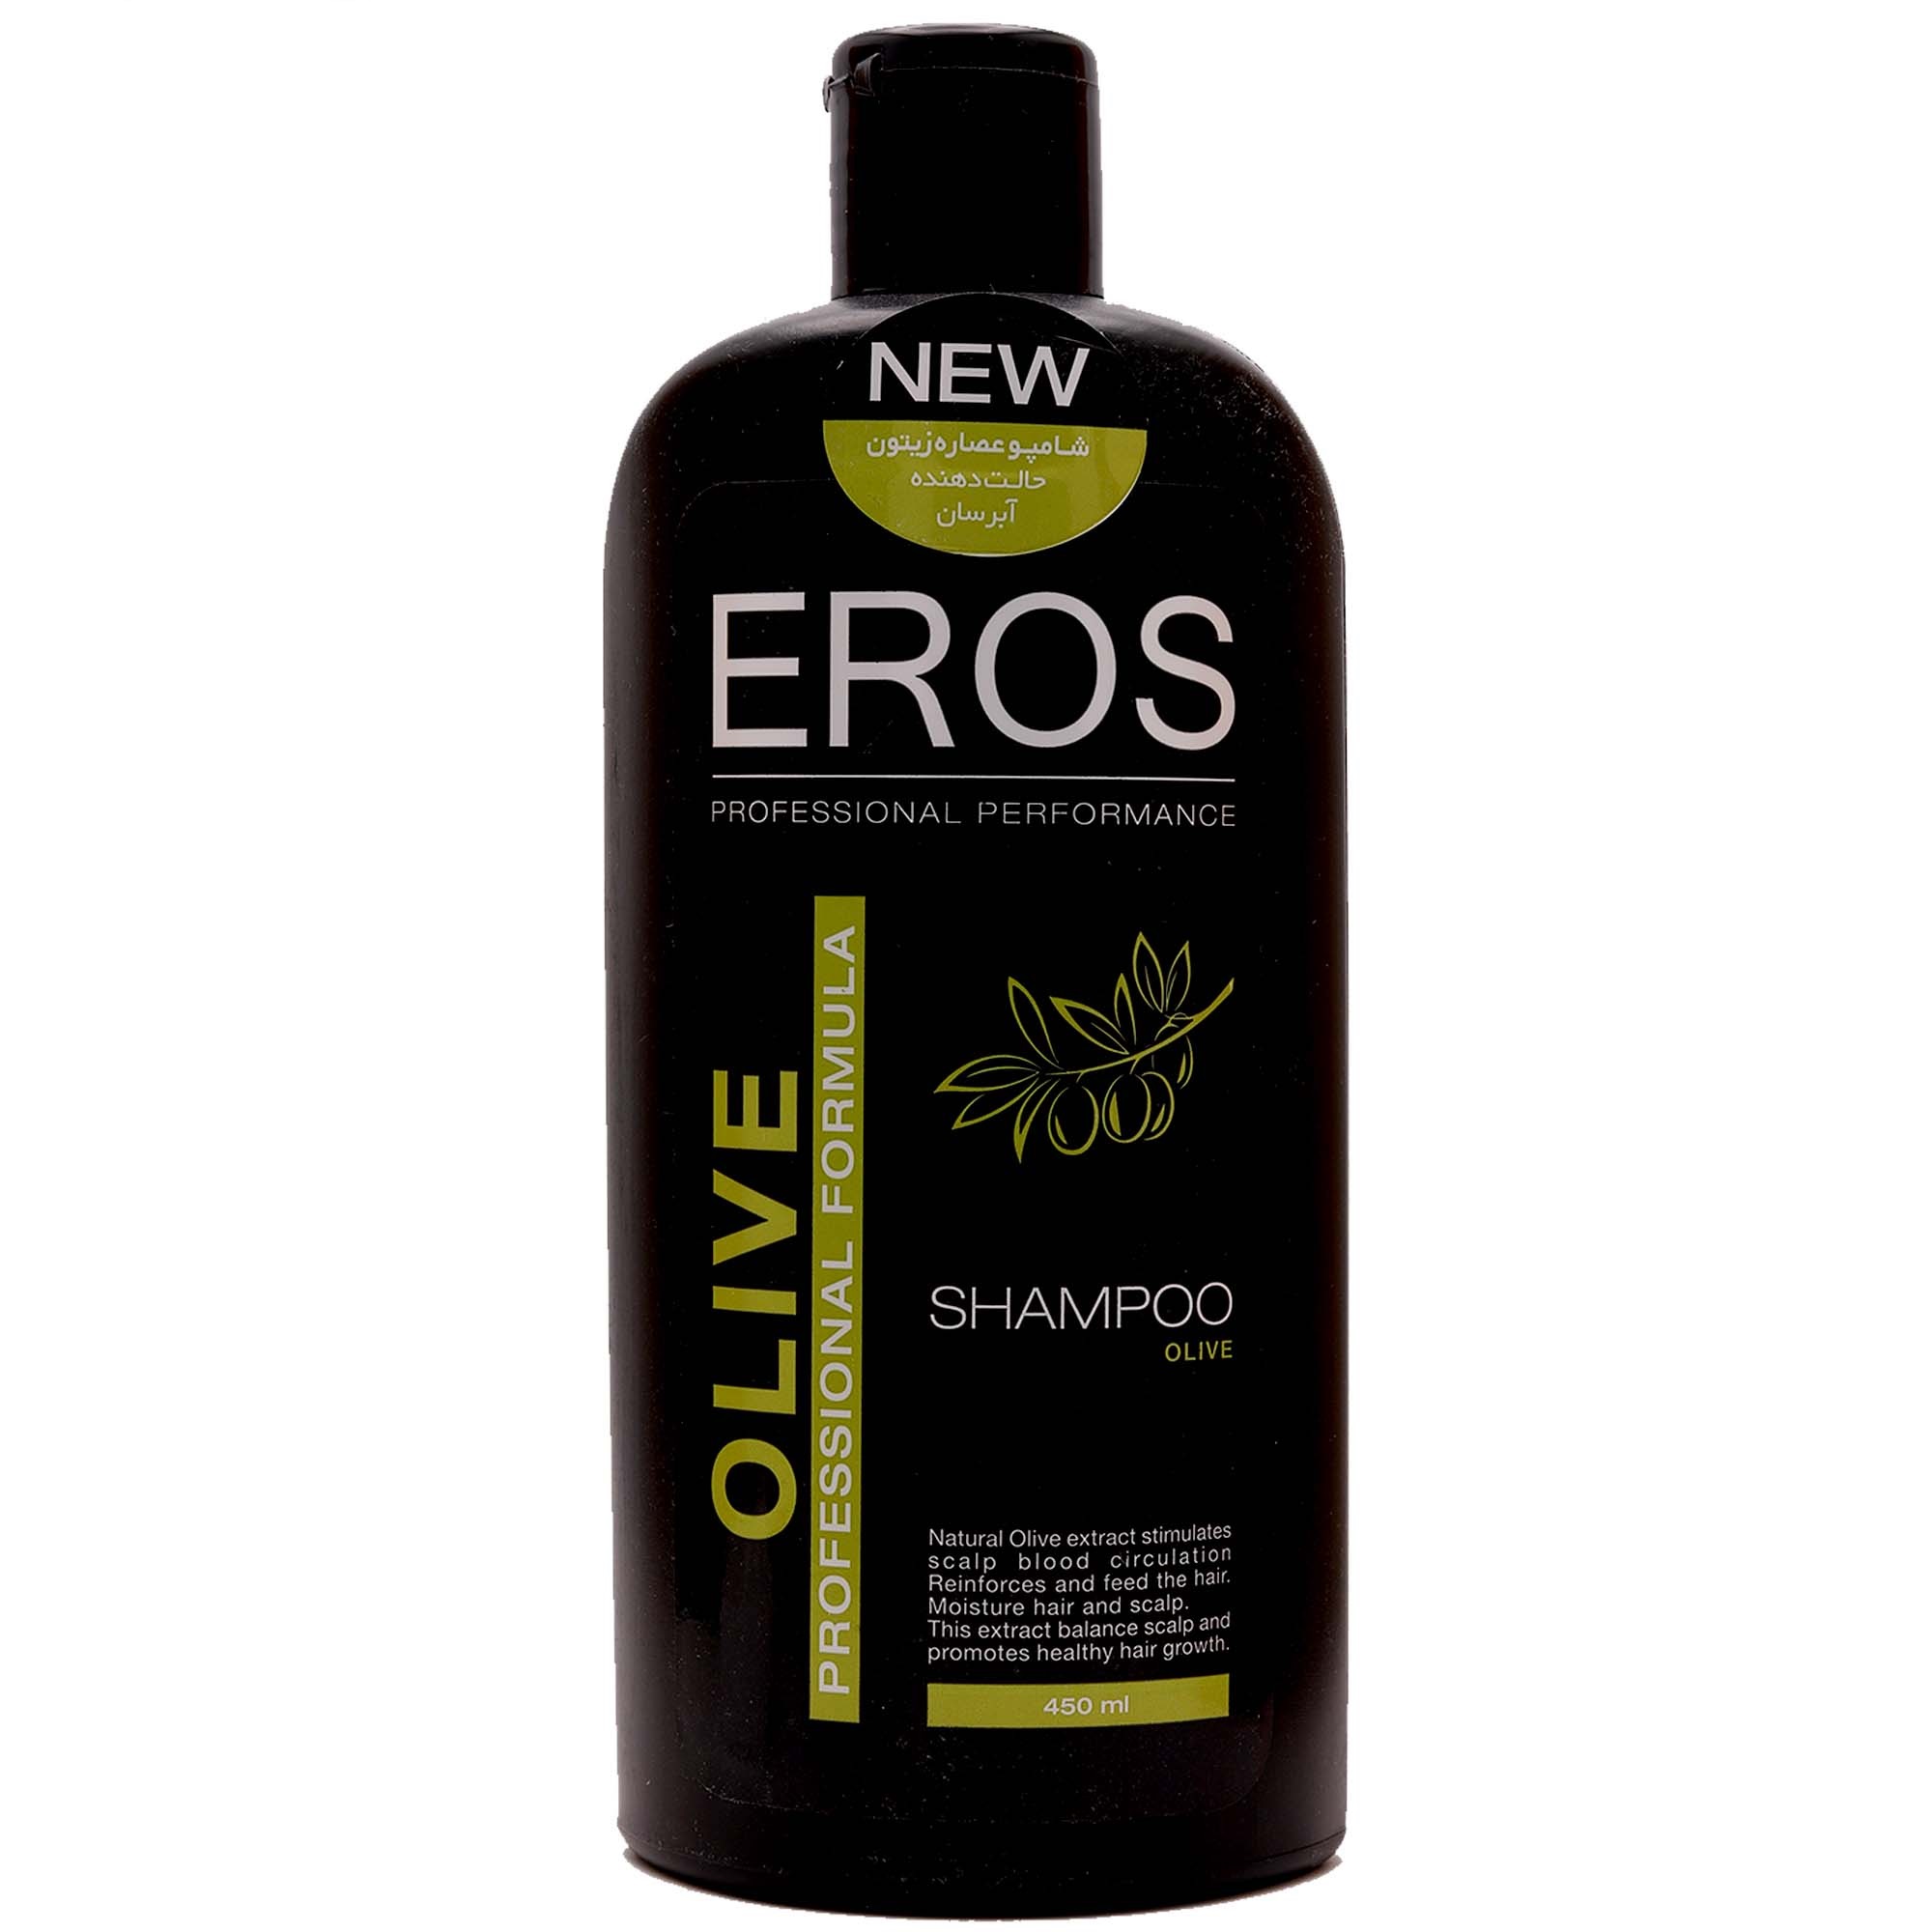 Hypoty Shampoo and Hydrons containing olive Airus extract - EROS 450 ml